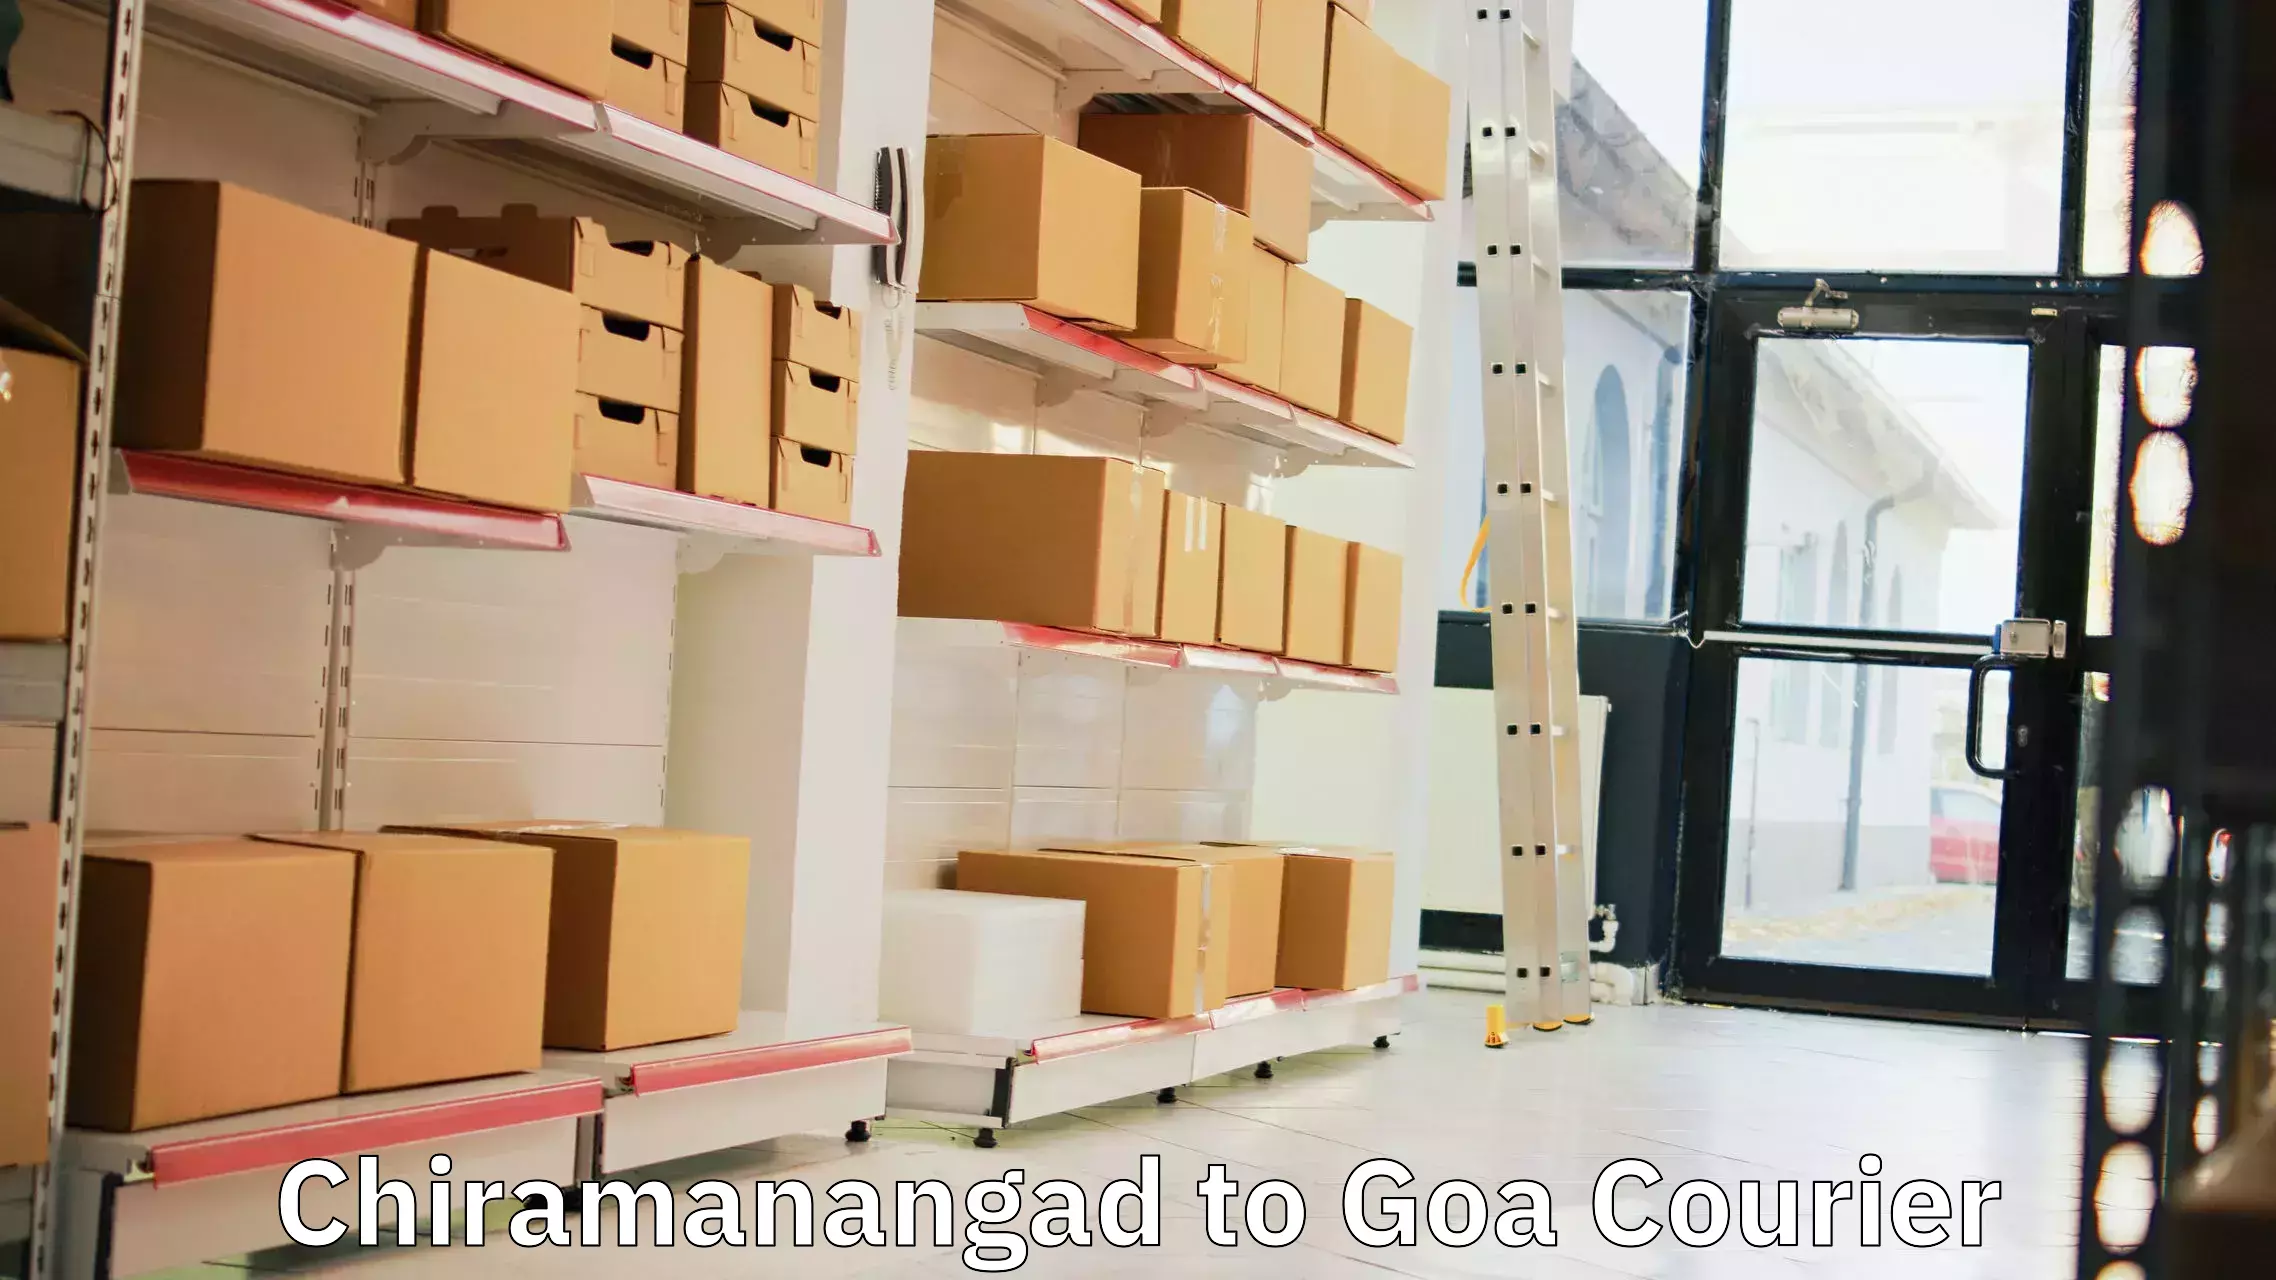 On-call courier service Chiramanangad to Margao